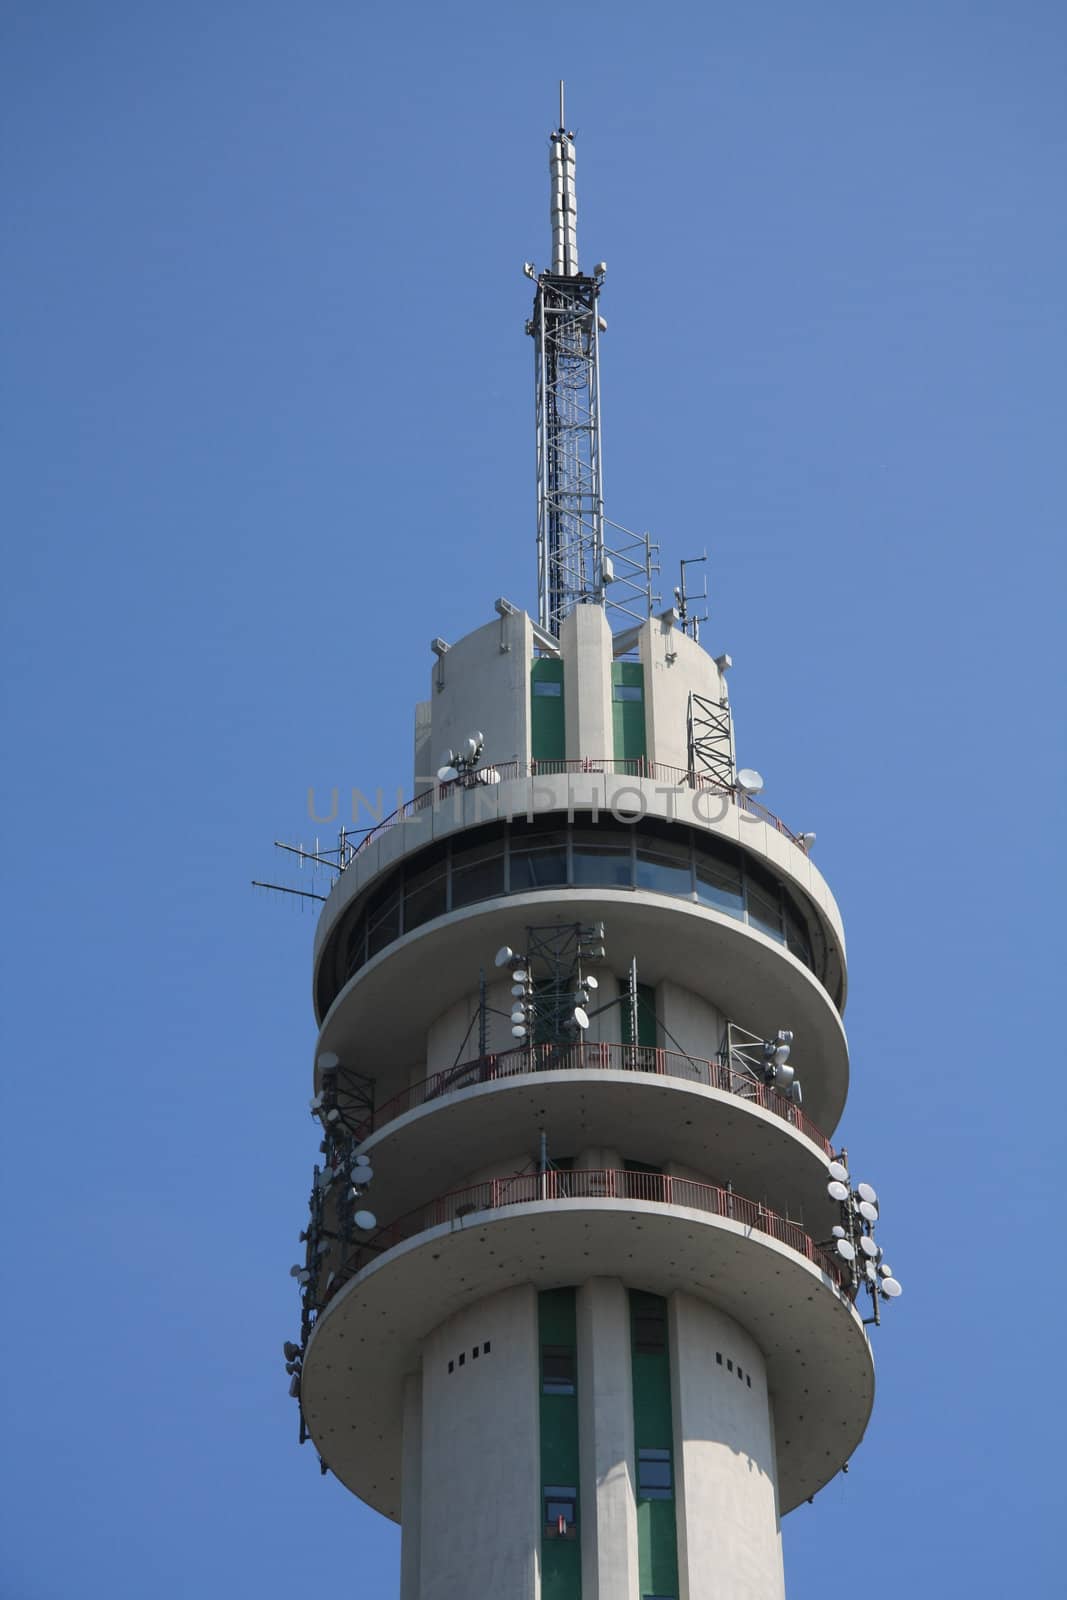 A telecommunication tower in a clear blue sky, showing loads of antennas and satelite connections